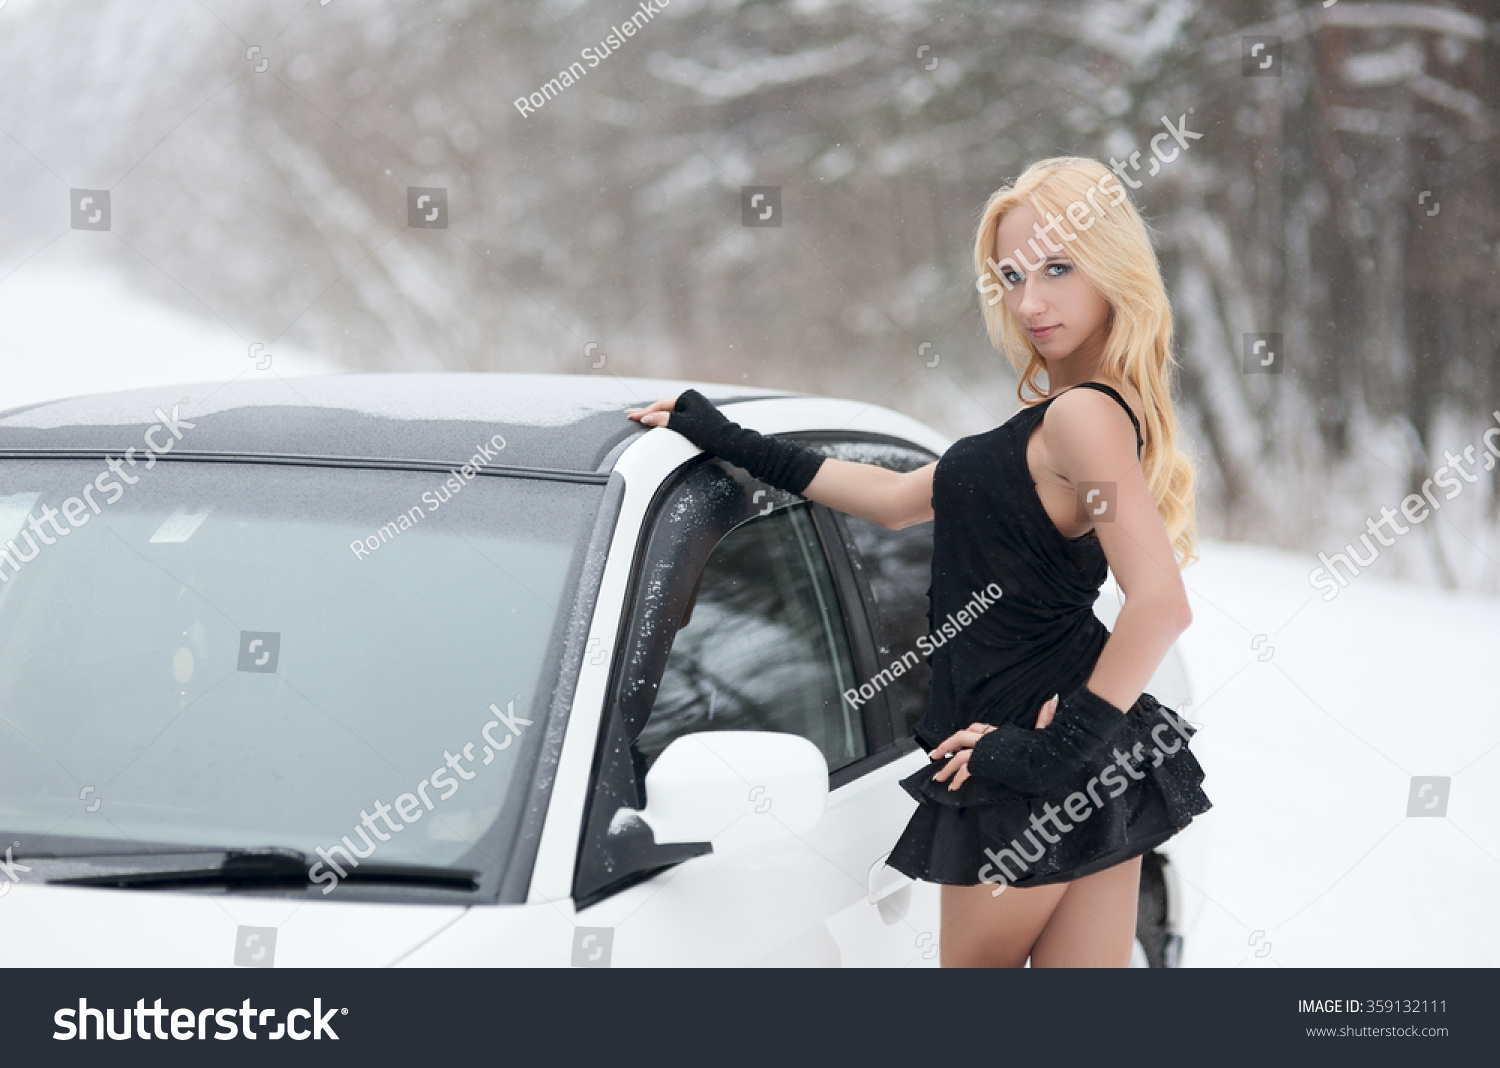 cindy harvel recommends short skirt in car pic